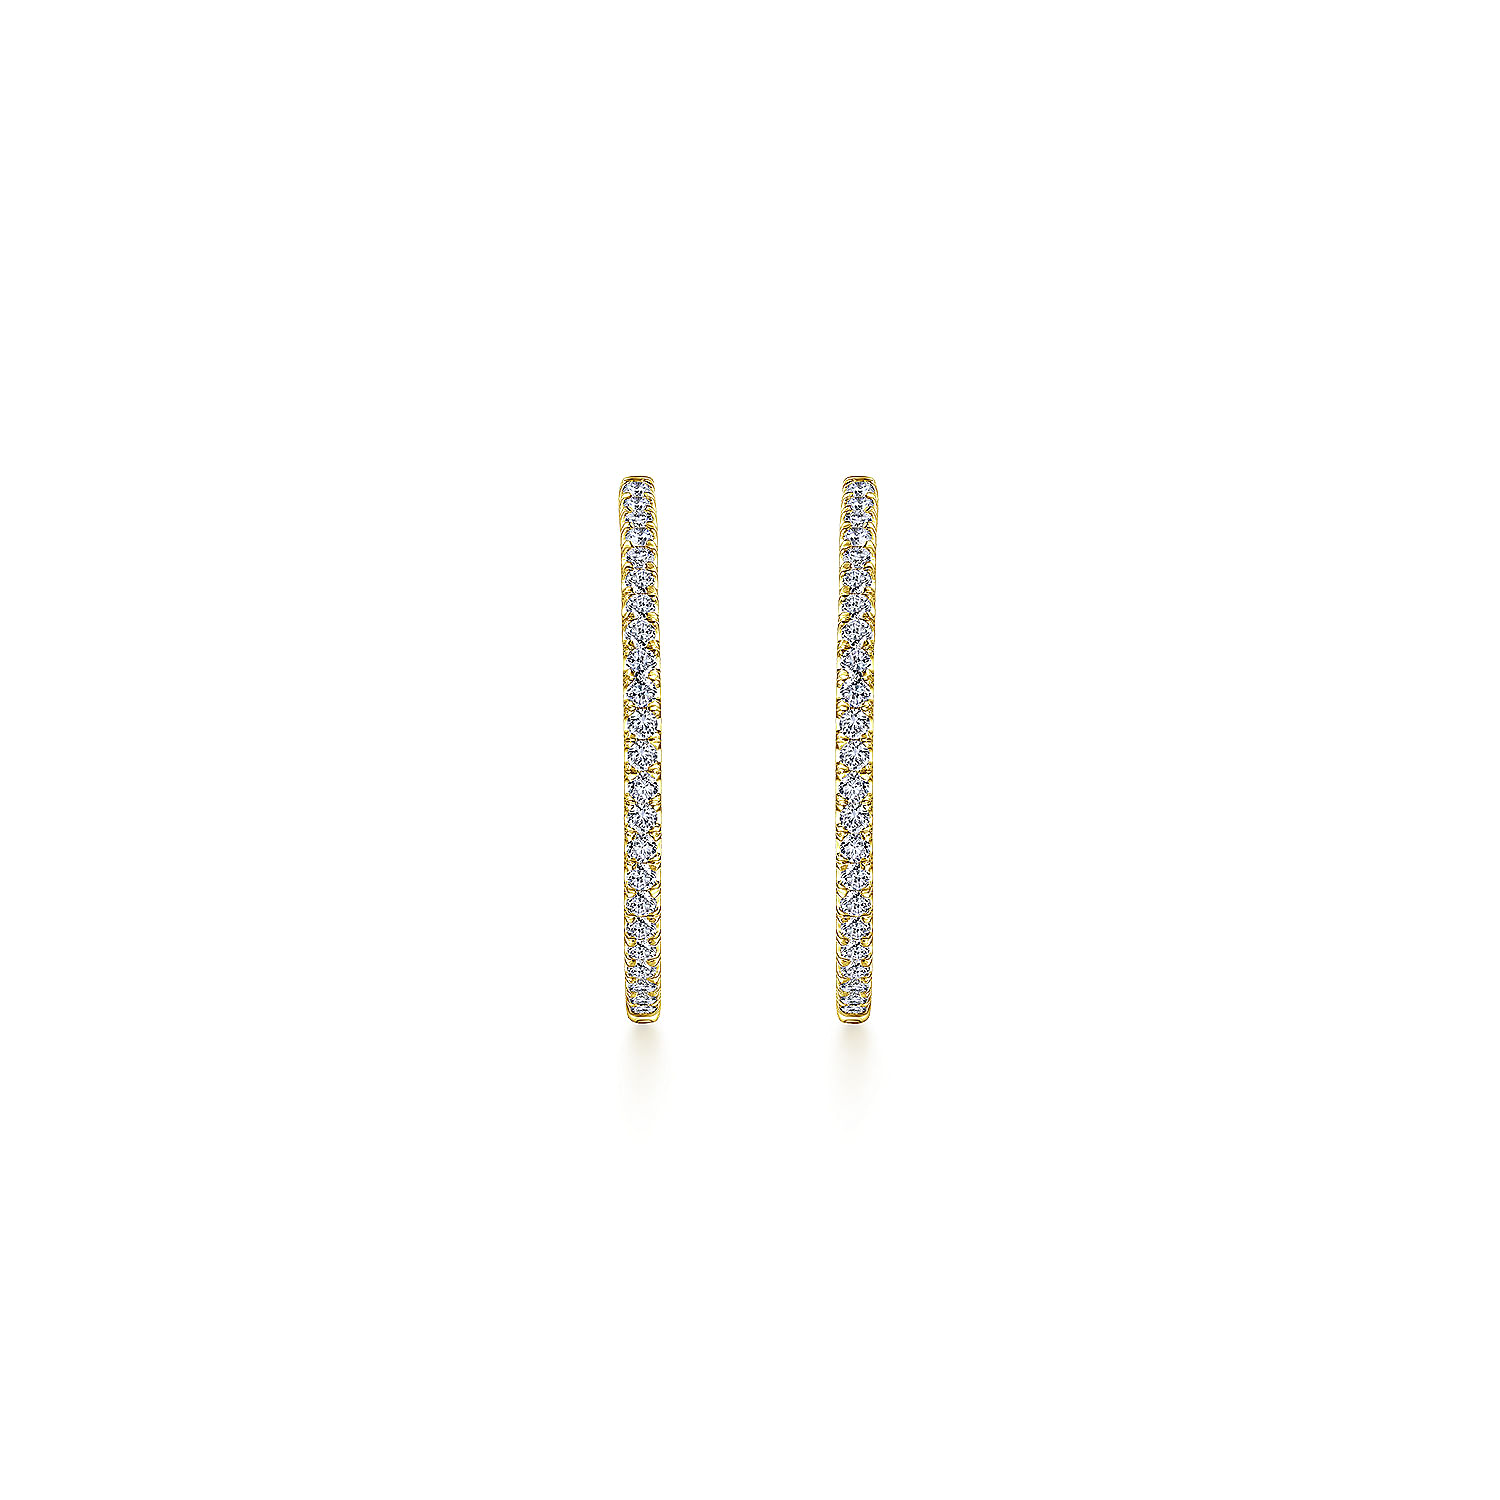 14K Yellow Gold French Pavé 30mm Round Inside Out Diamond Hoop Earrings